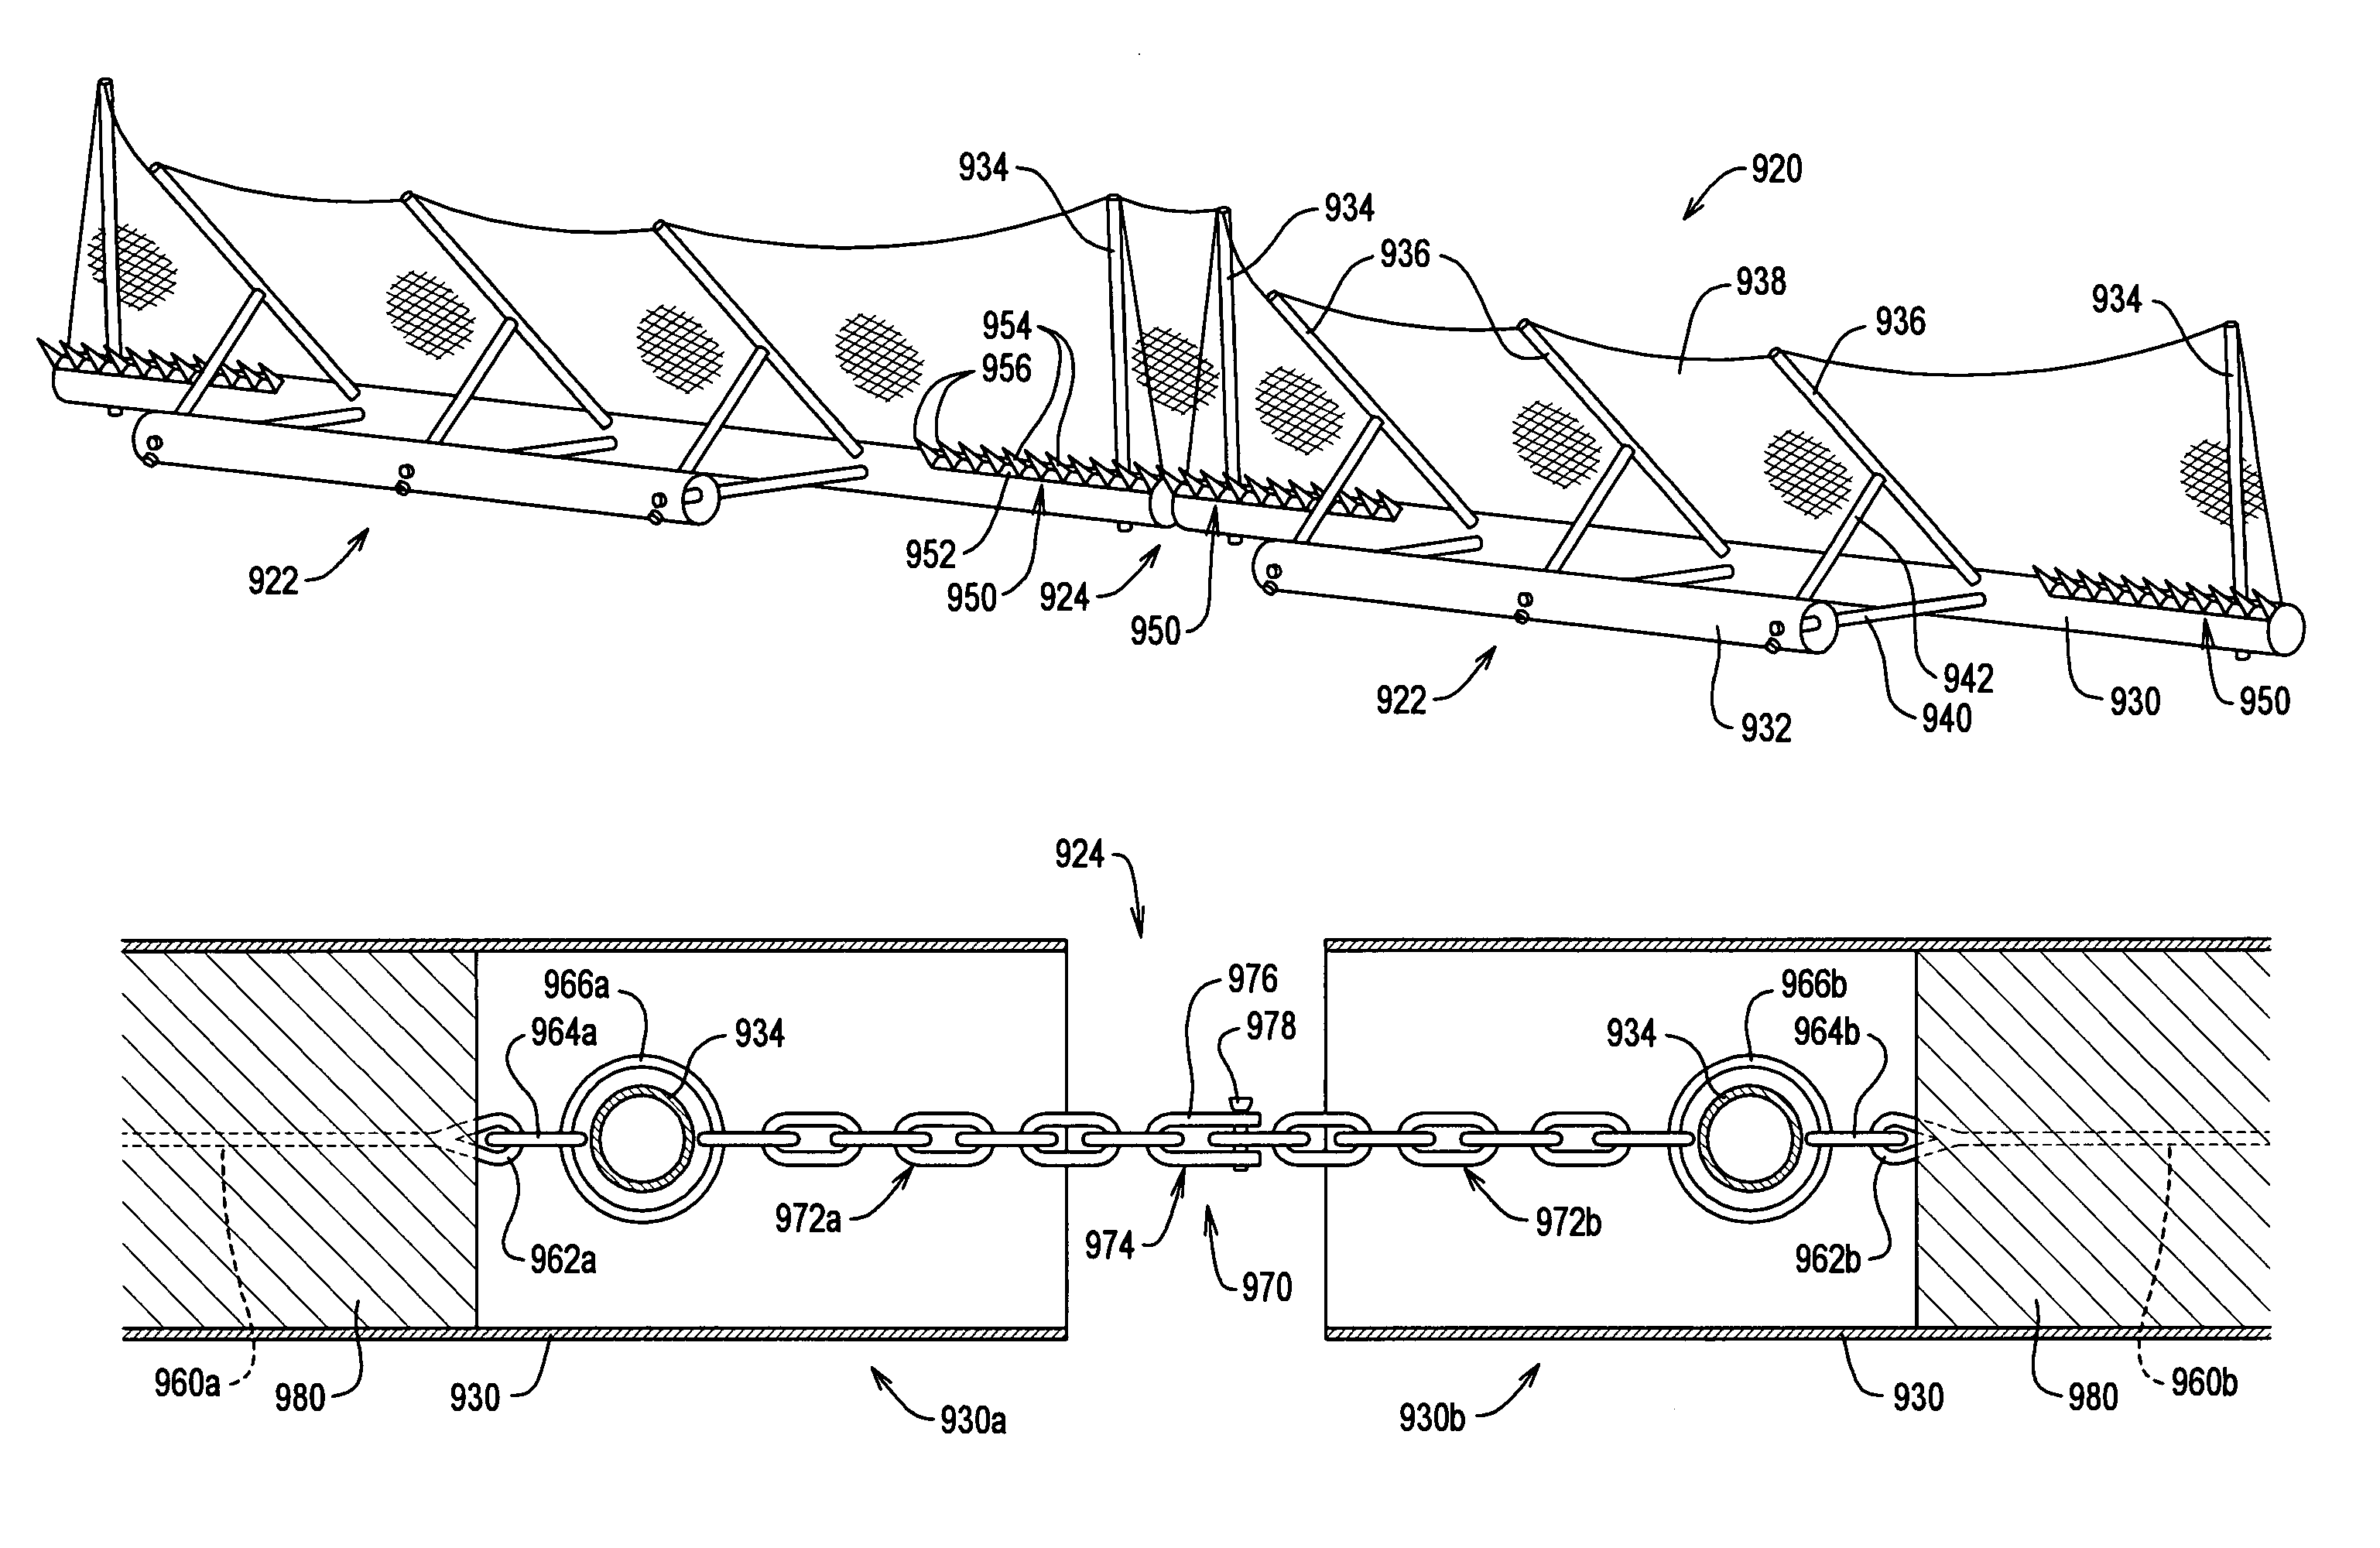 Coupling systems and methods for marine barriers